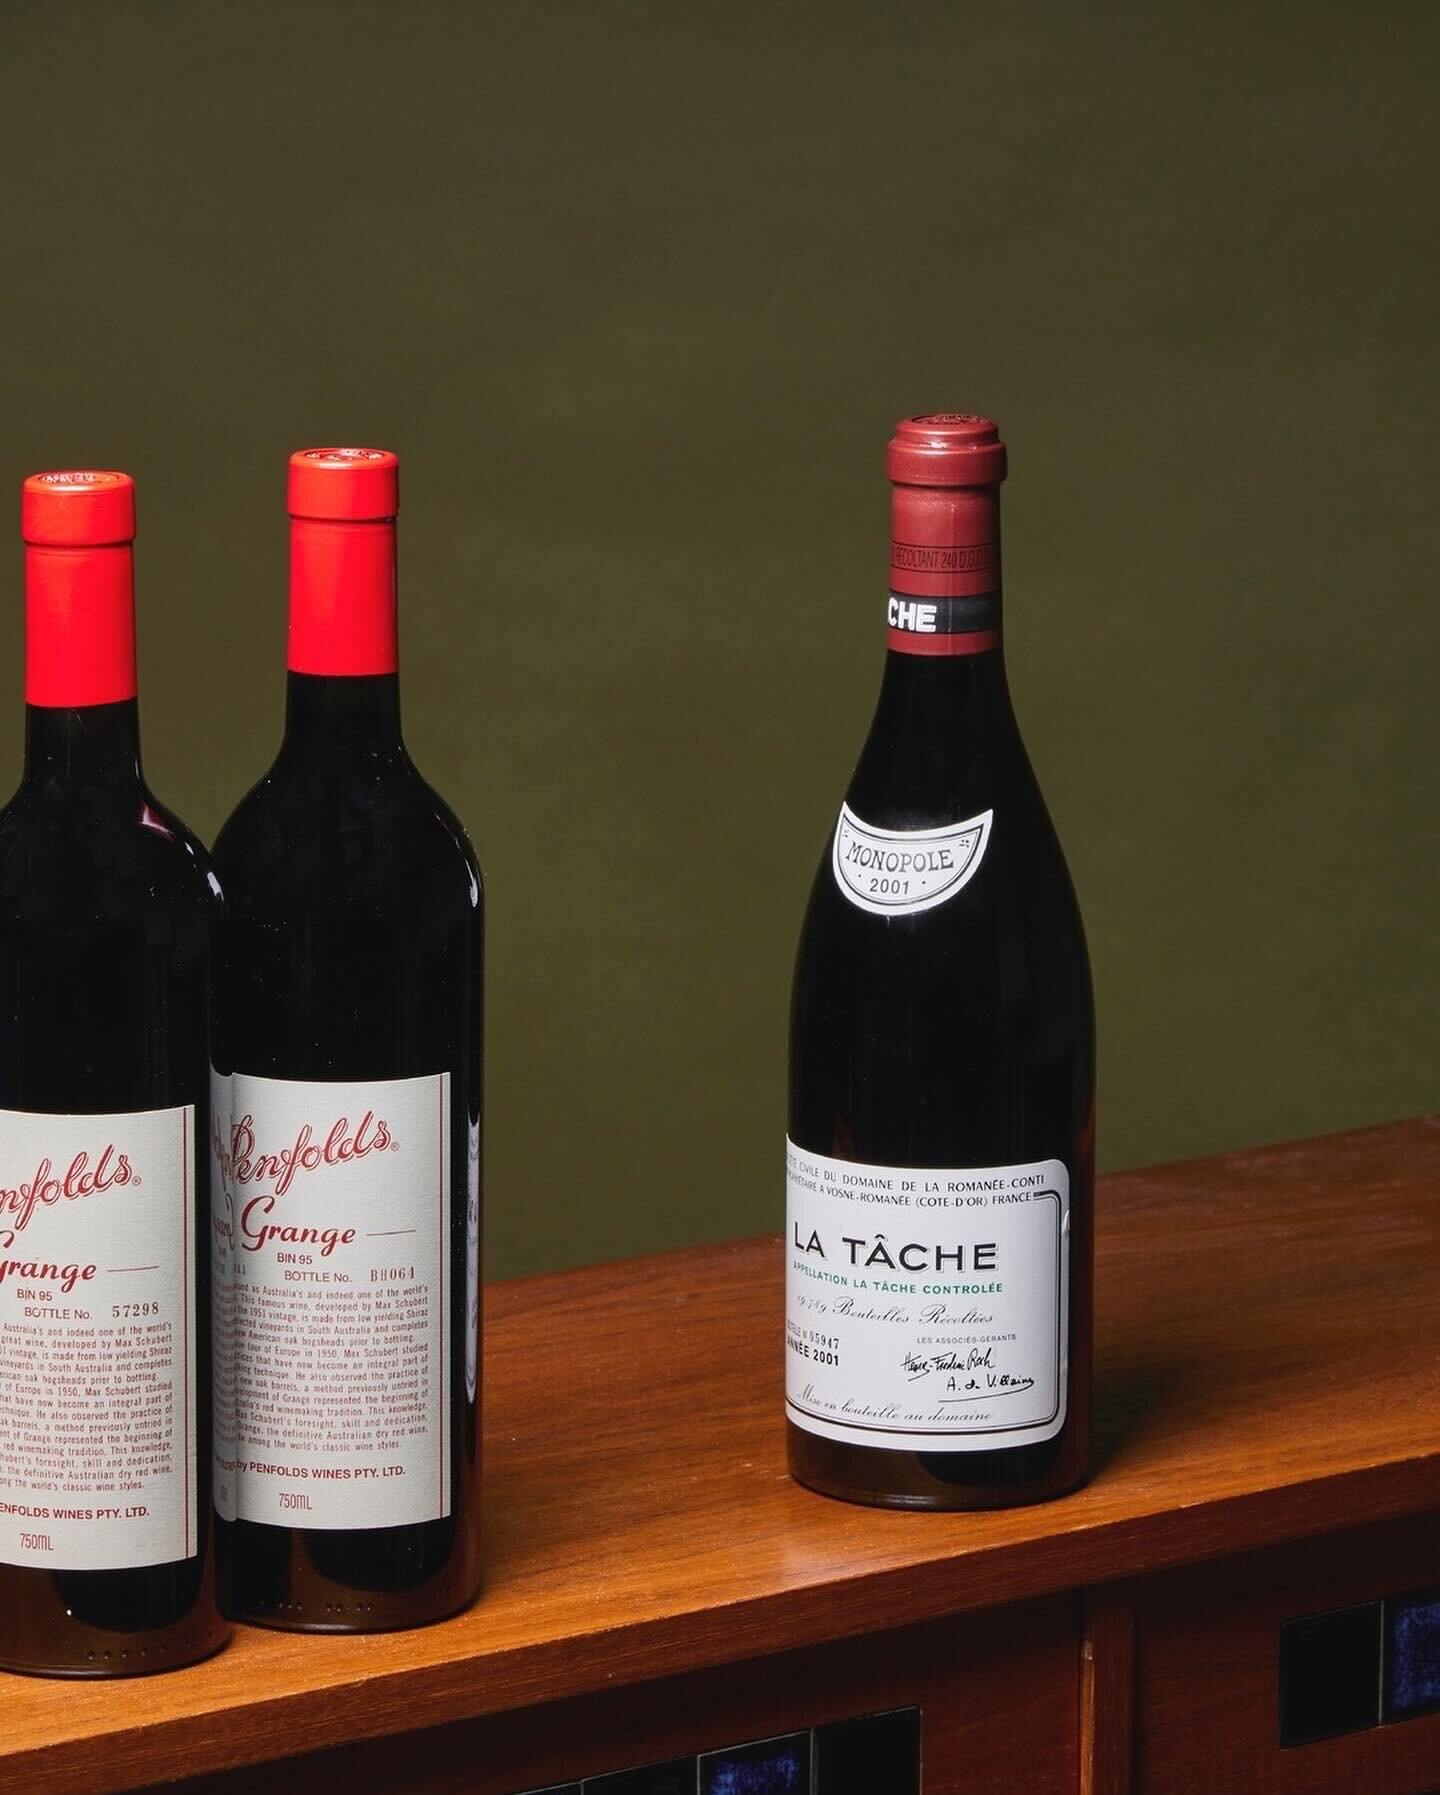 Fine Wines &amp; Whiskies | Online Auction

Webb&rsquo;s first Fine Wines &amp; Whiskies Online auction of the year kicks off today and it features a fantastic selection of wines and spirits, with bids starting from as little as $1. This is an excell